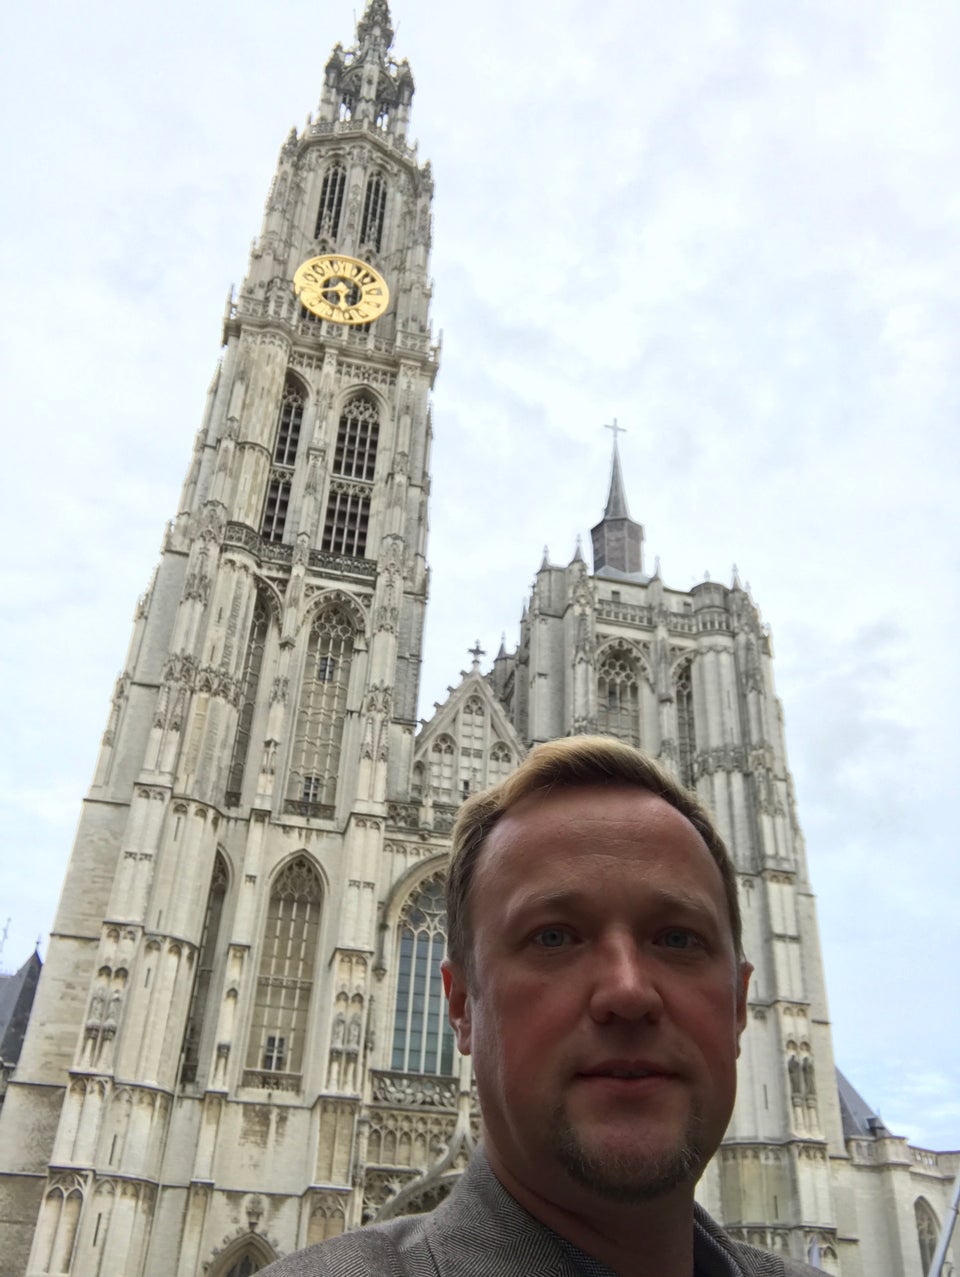 Photo of Onze-Lieve-Vrouwekathedraal (Cathedral of Our Lady)